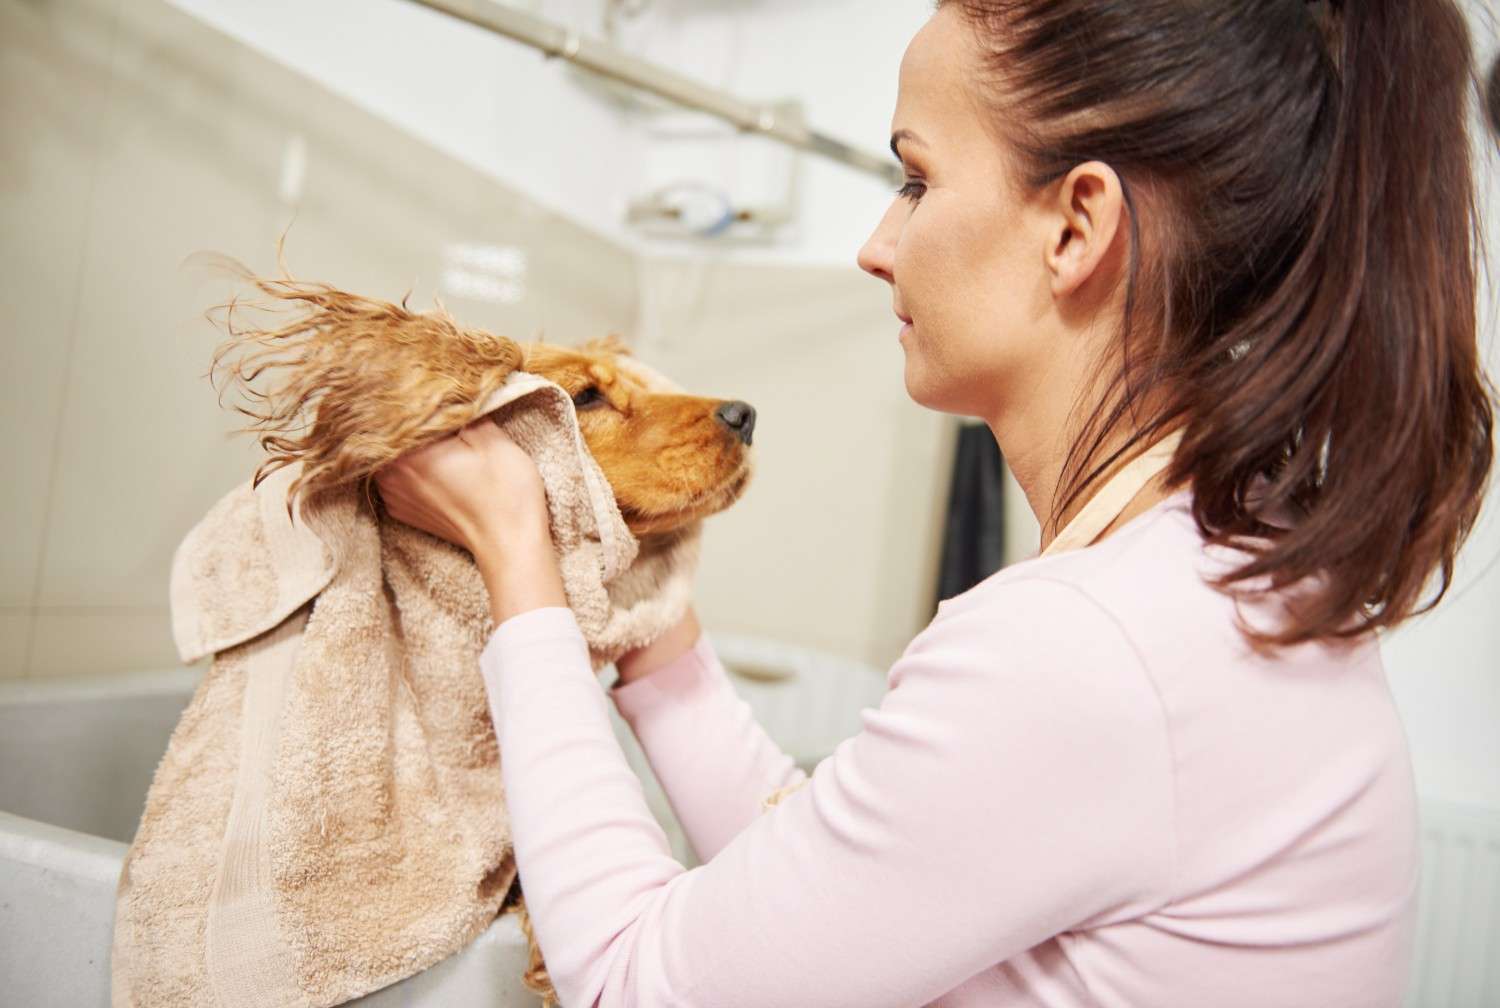 Pet groomers grooming a dog